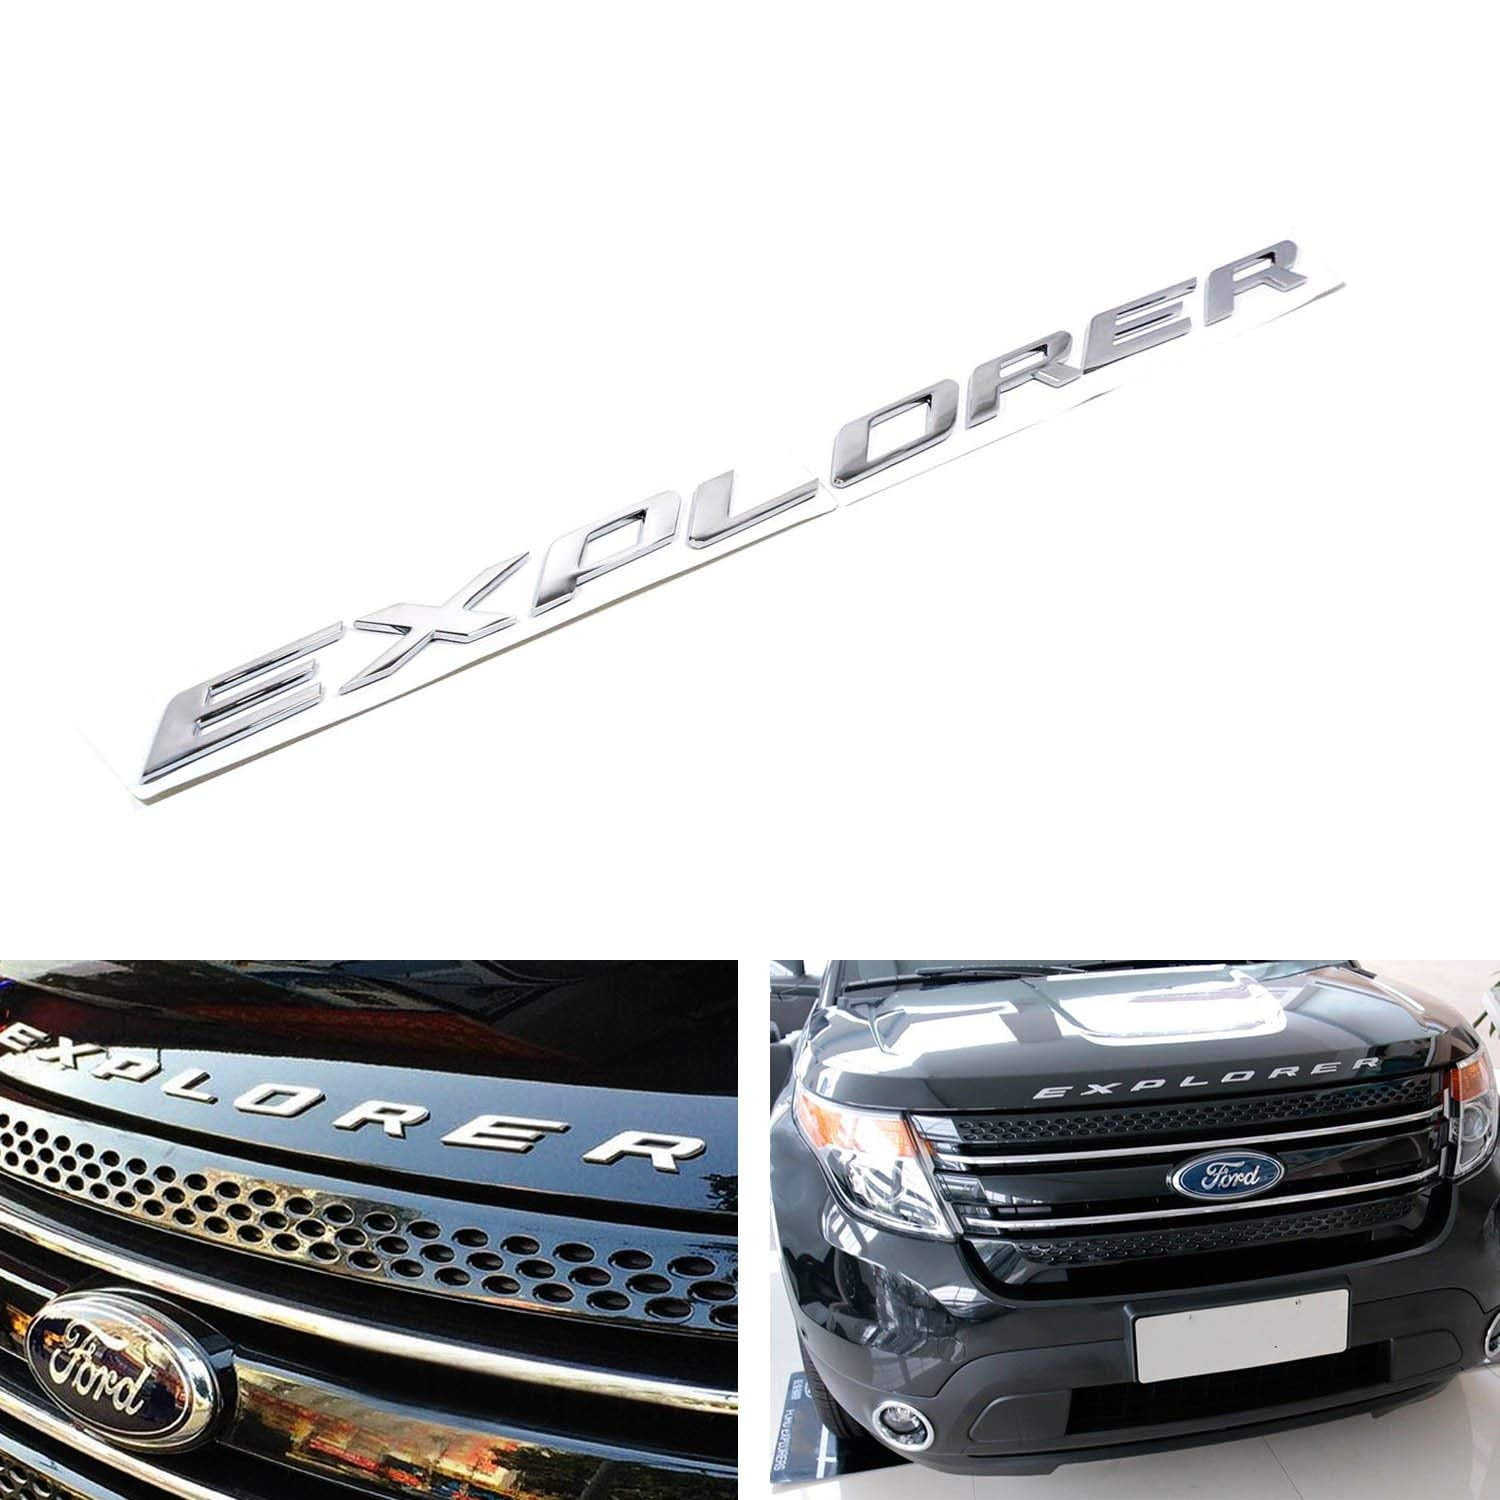 1 Set Sporty Chrome Silver Front Hood Fender 3D Letters EXPLORER Car Stickers For Ford 2011-2019 